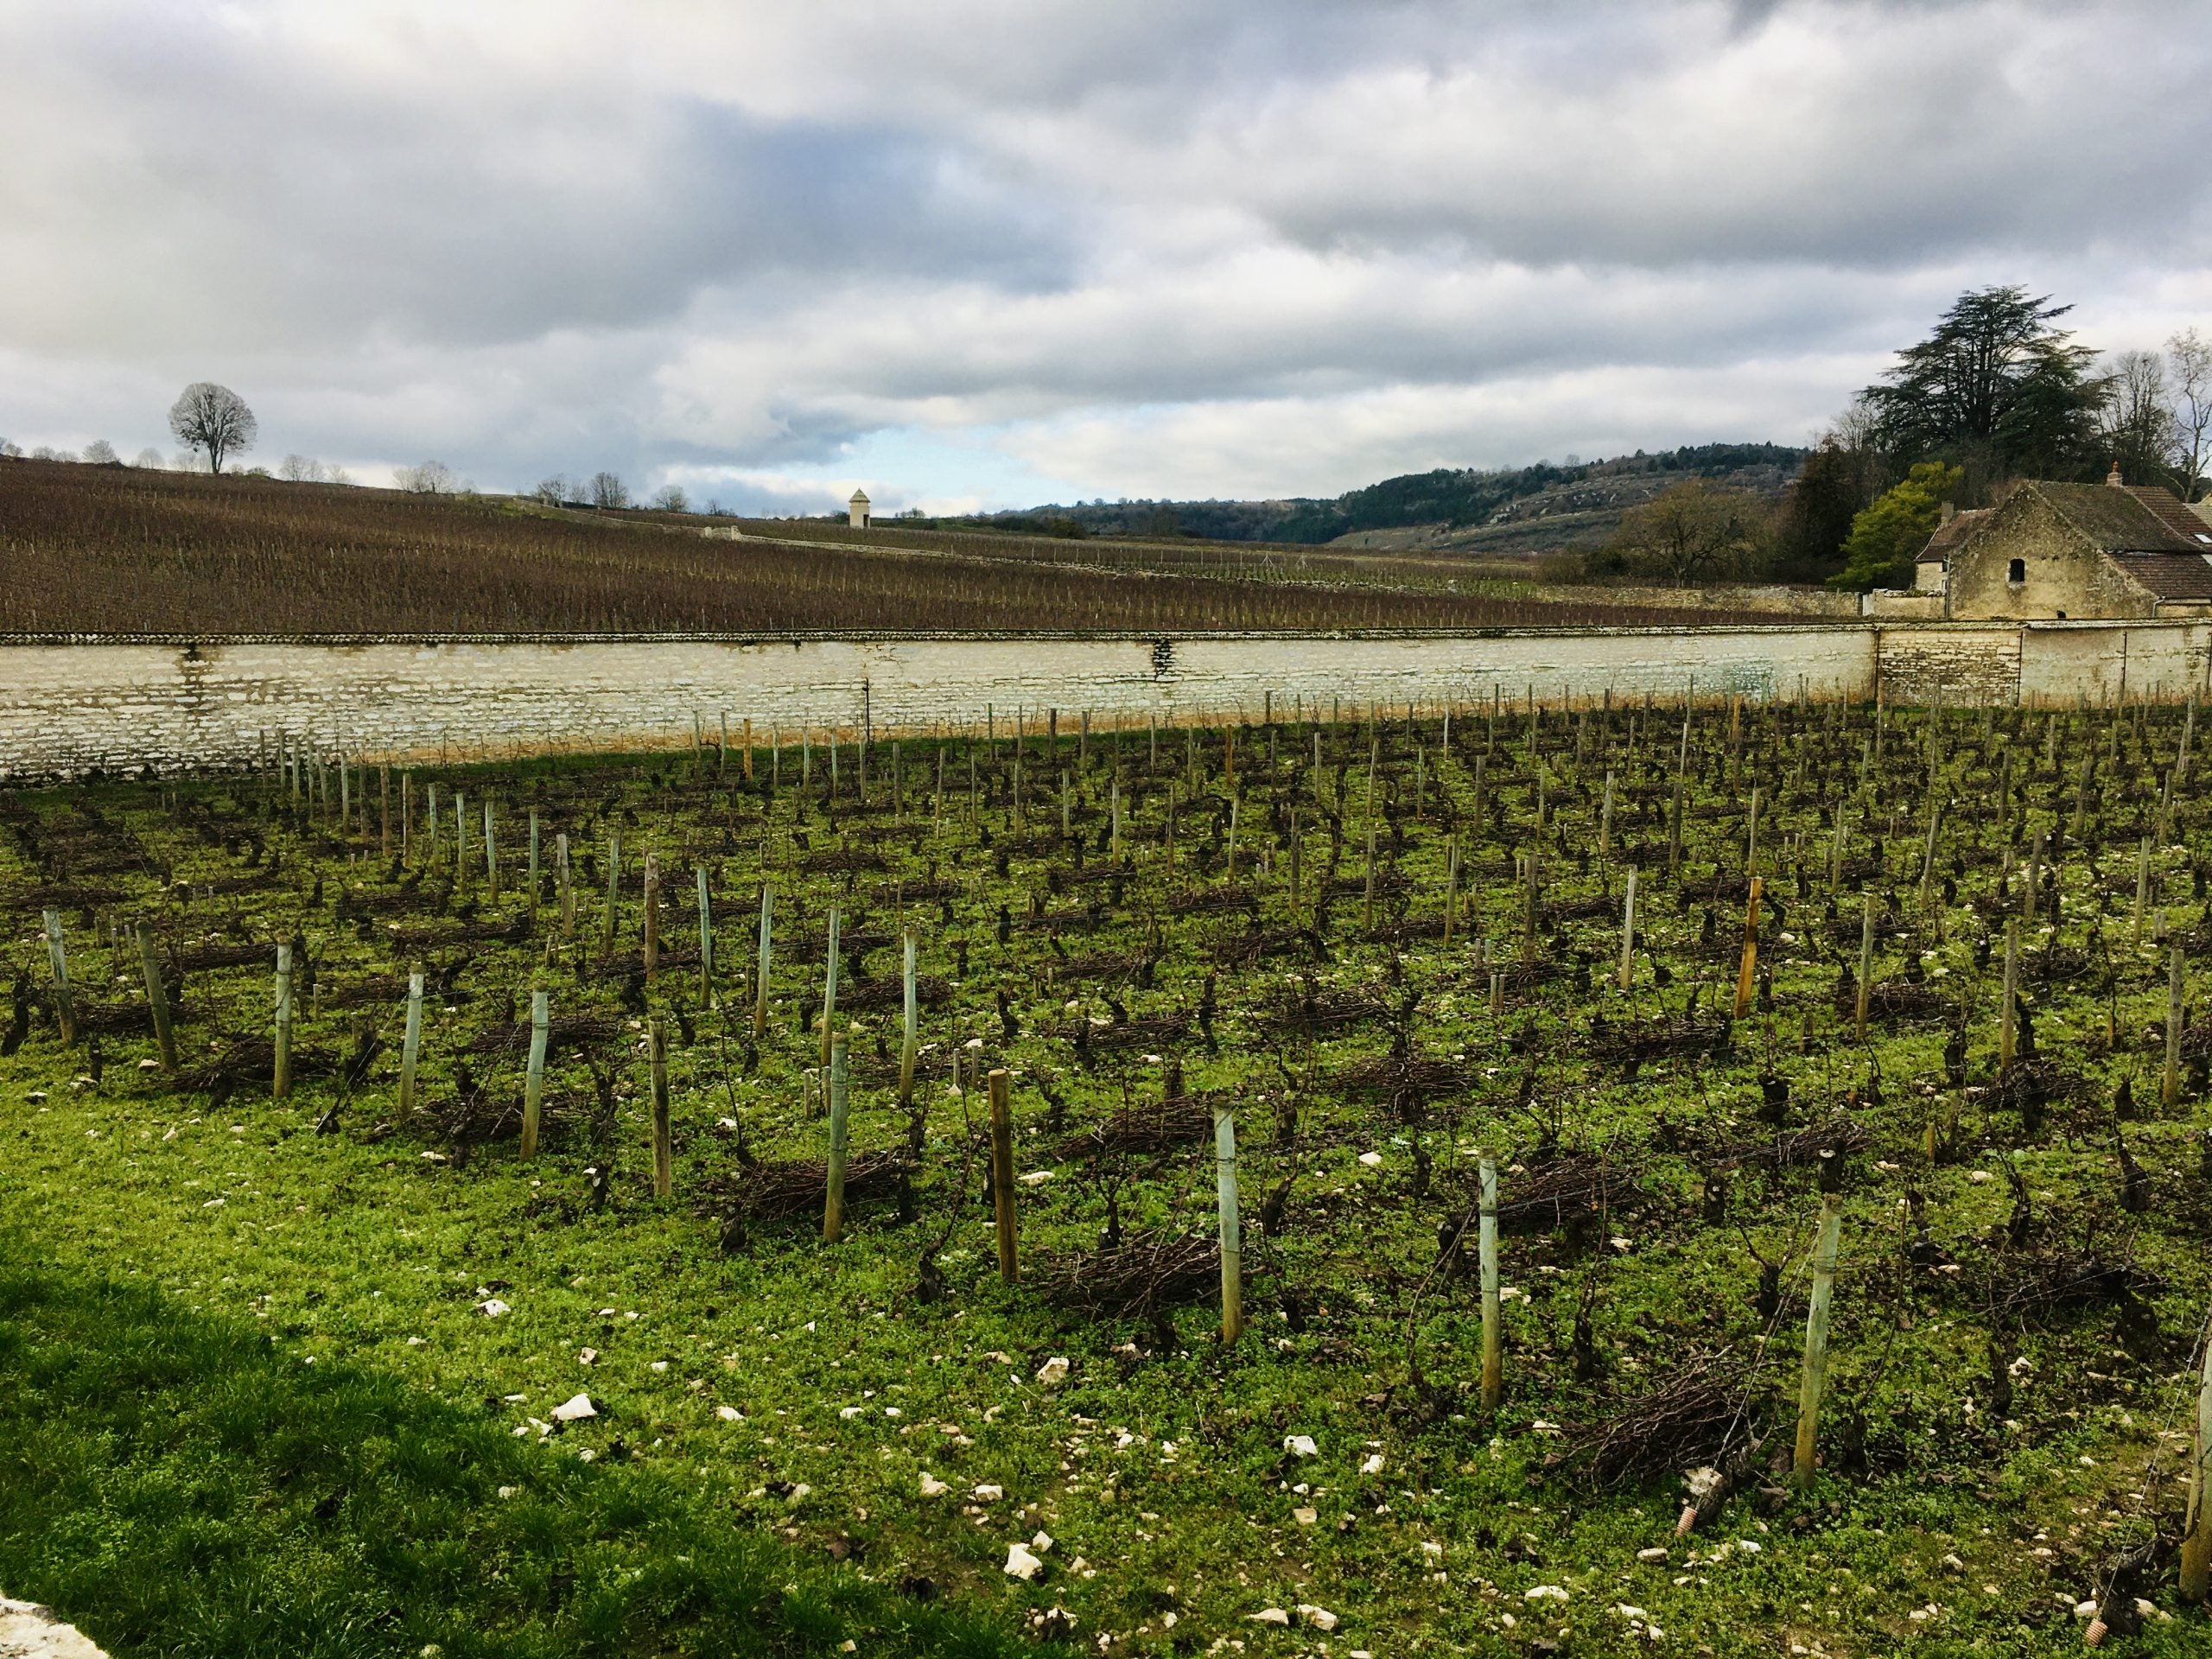 Burgundy in the time of Covid